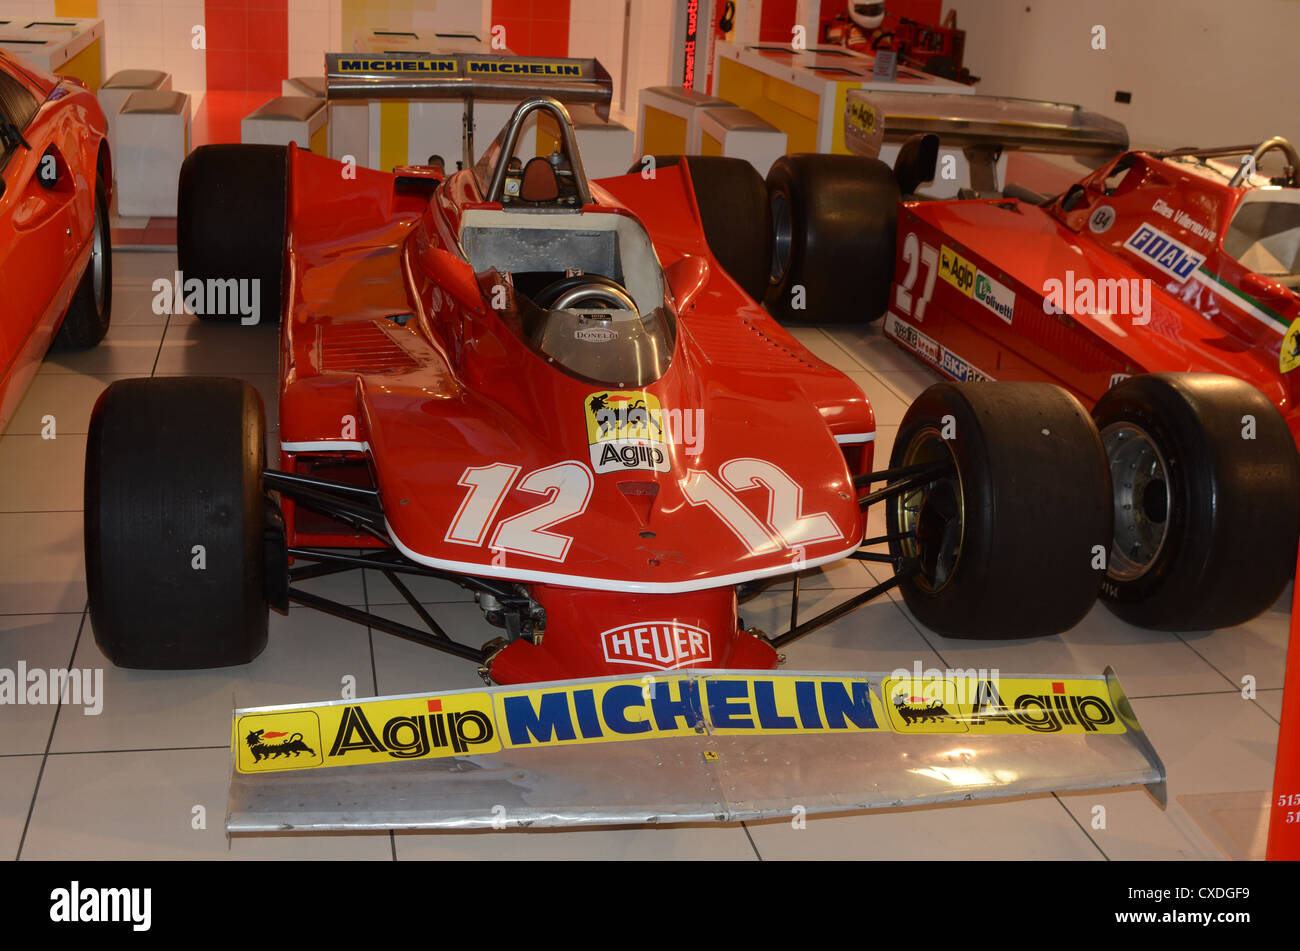 Niki Lauda Helmet High Resolution Stock Photography and Images - Alamy